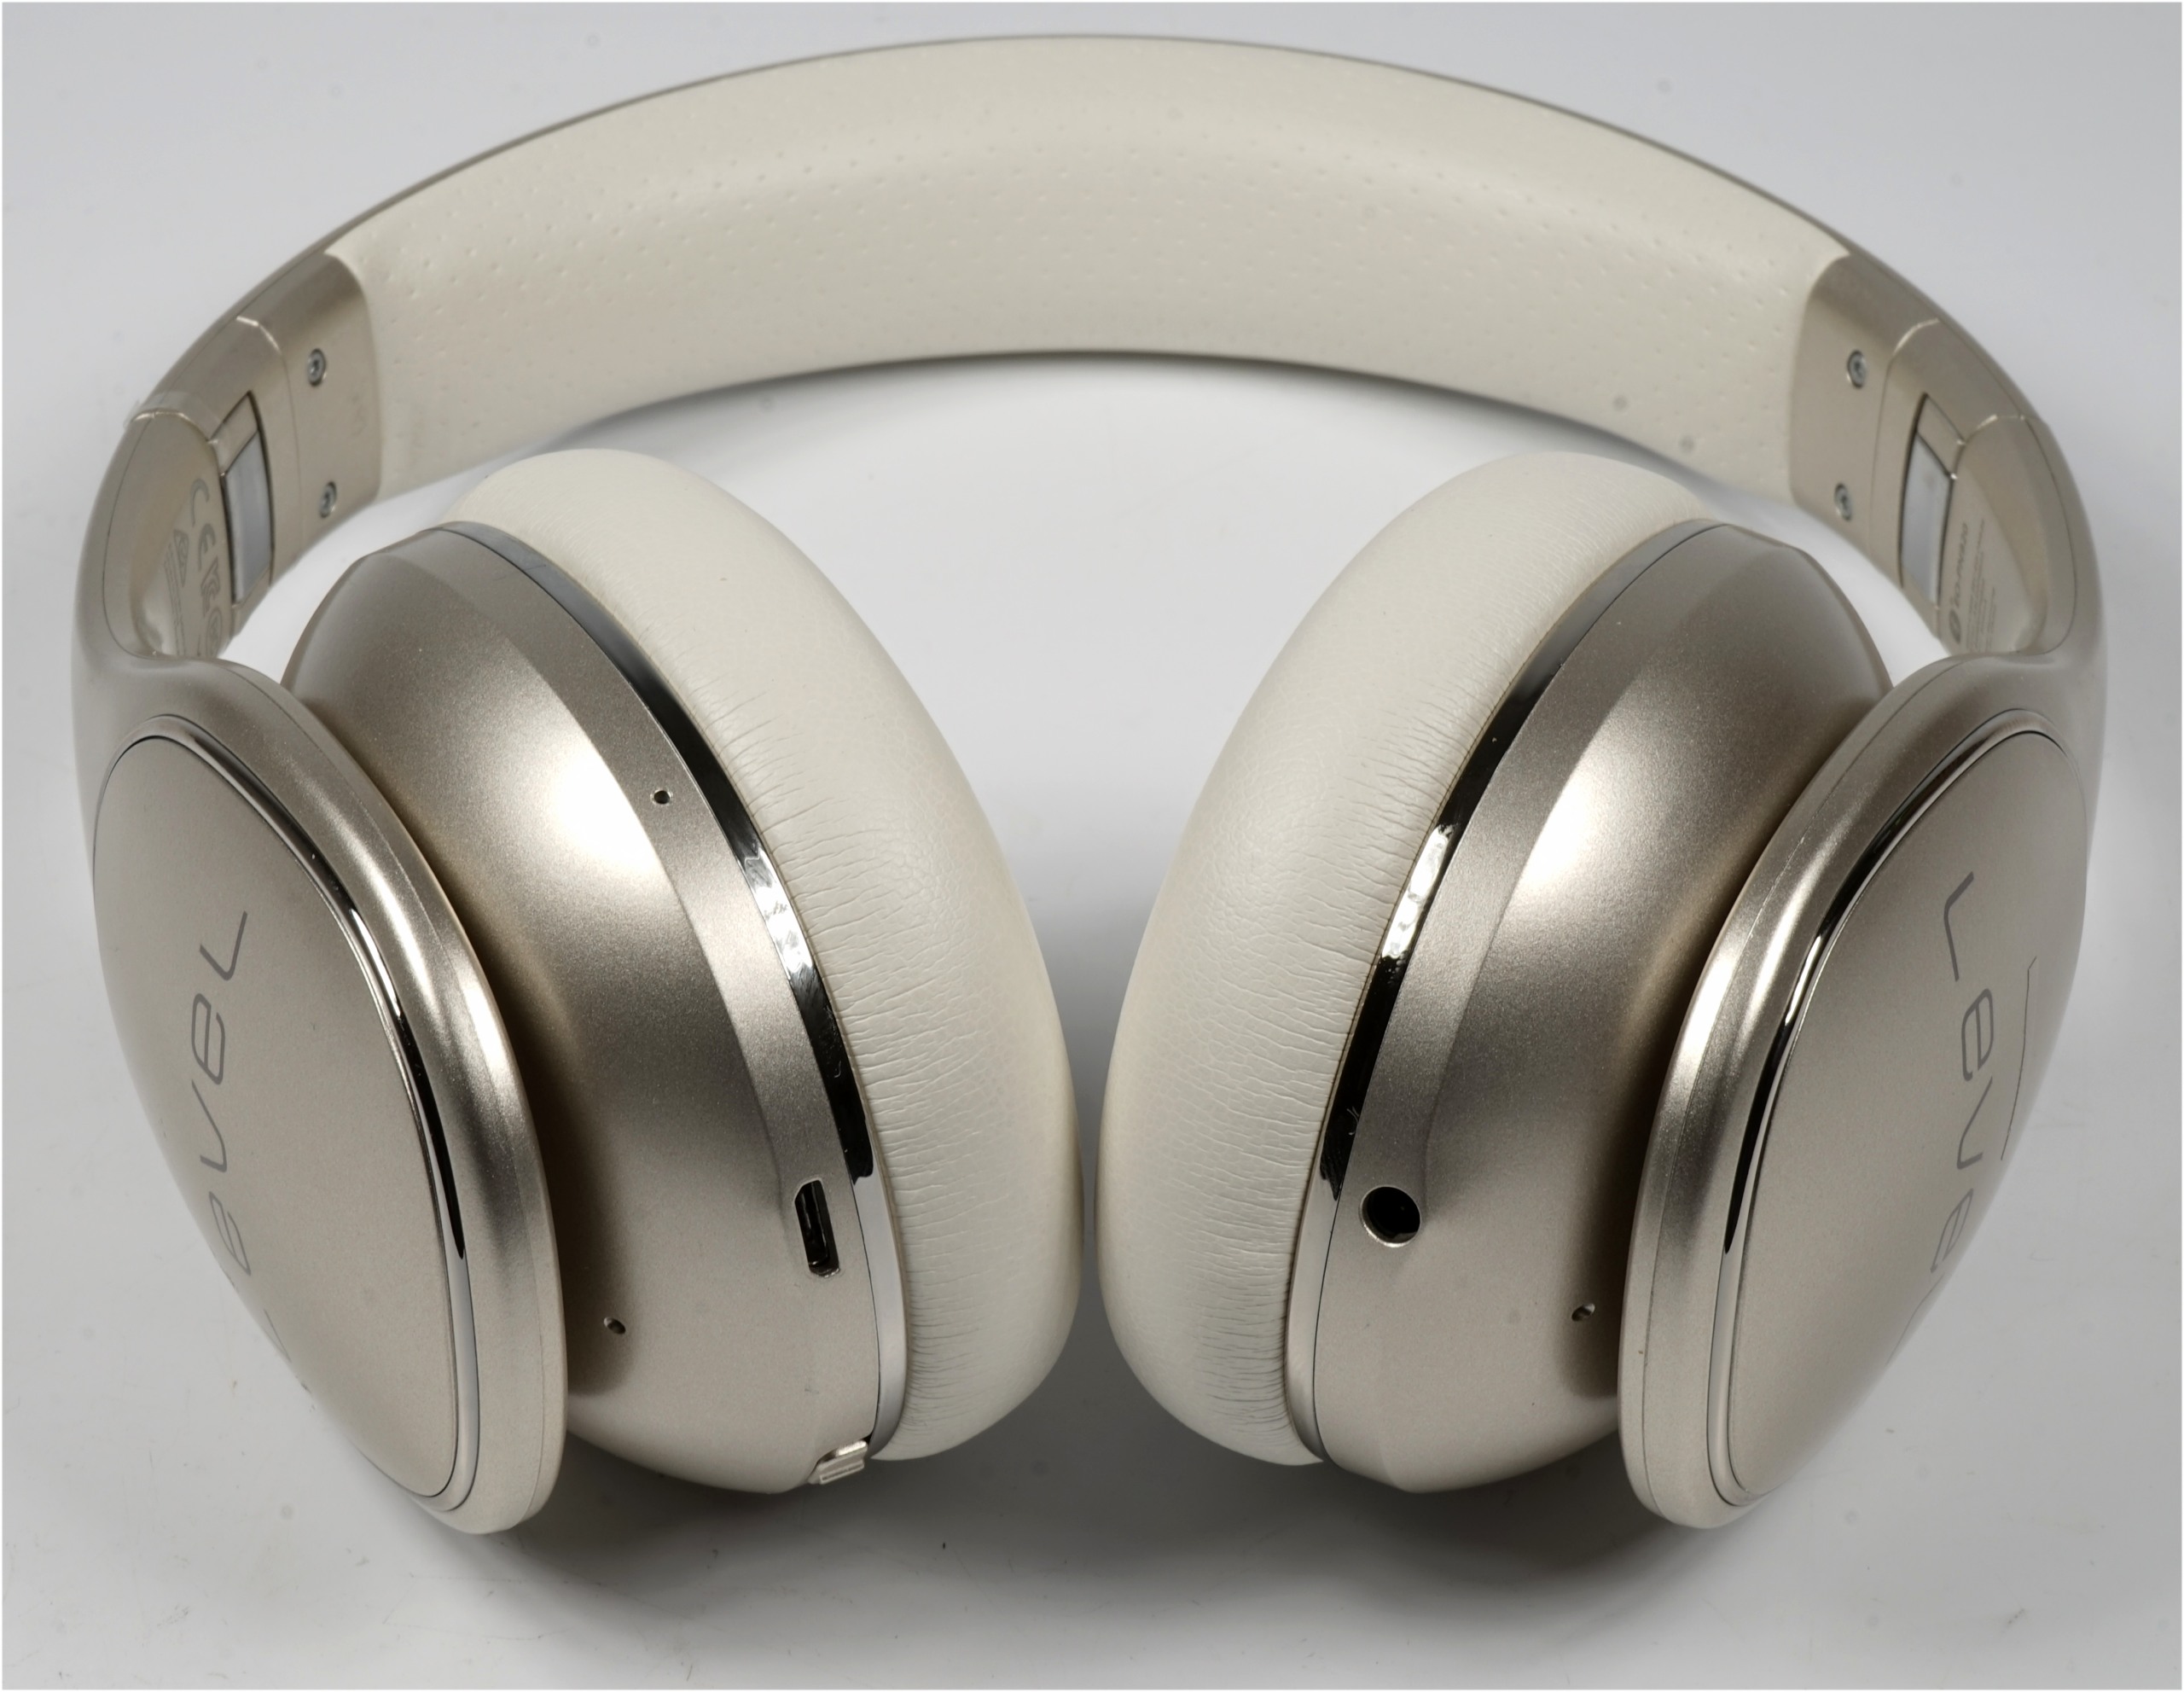 I tried the noise canceling function of Samsung's wireless